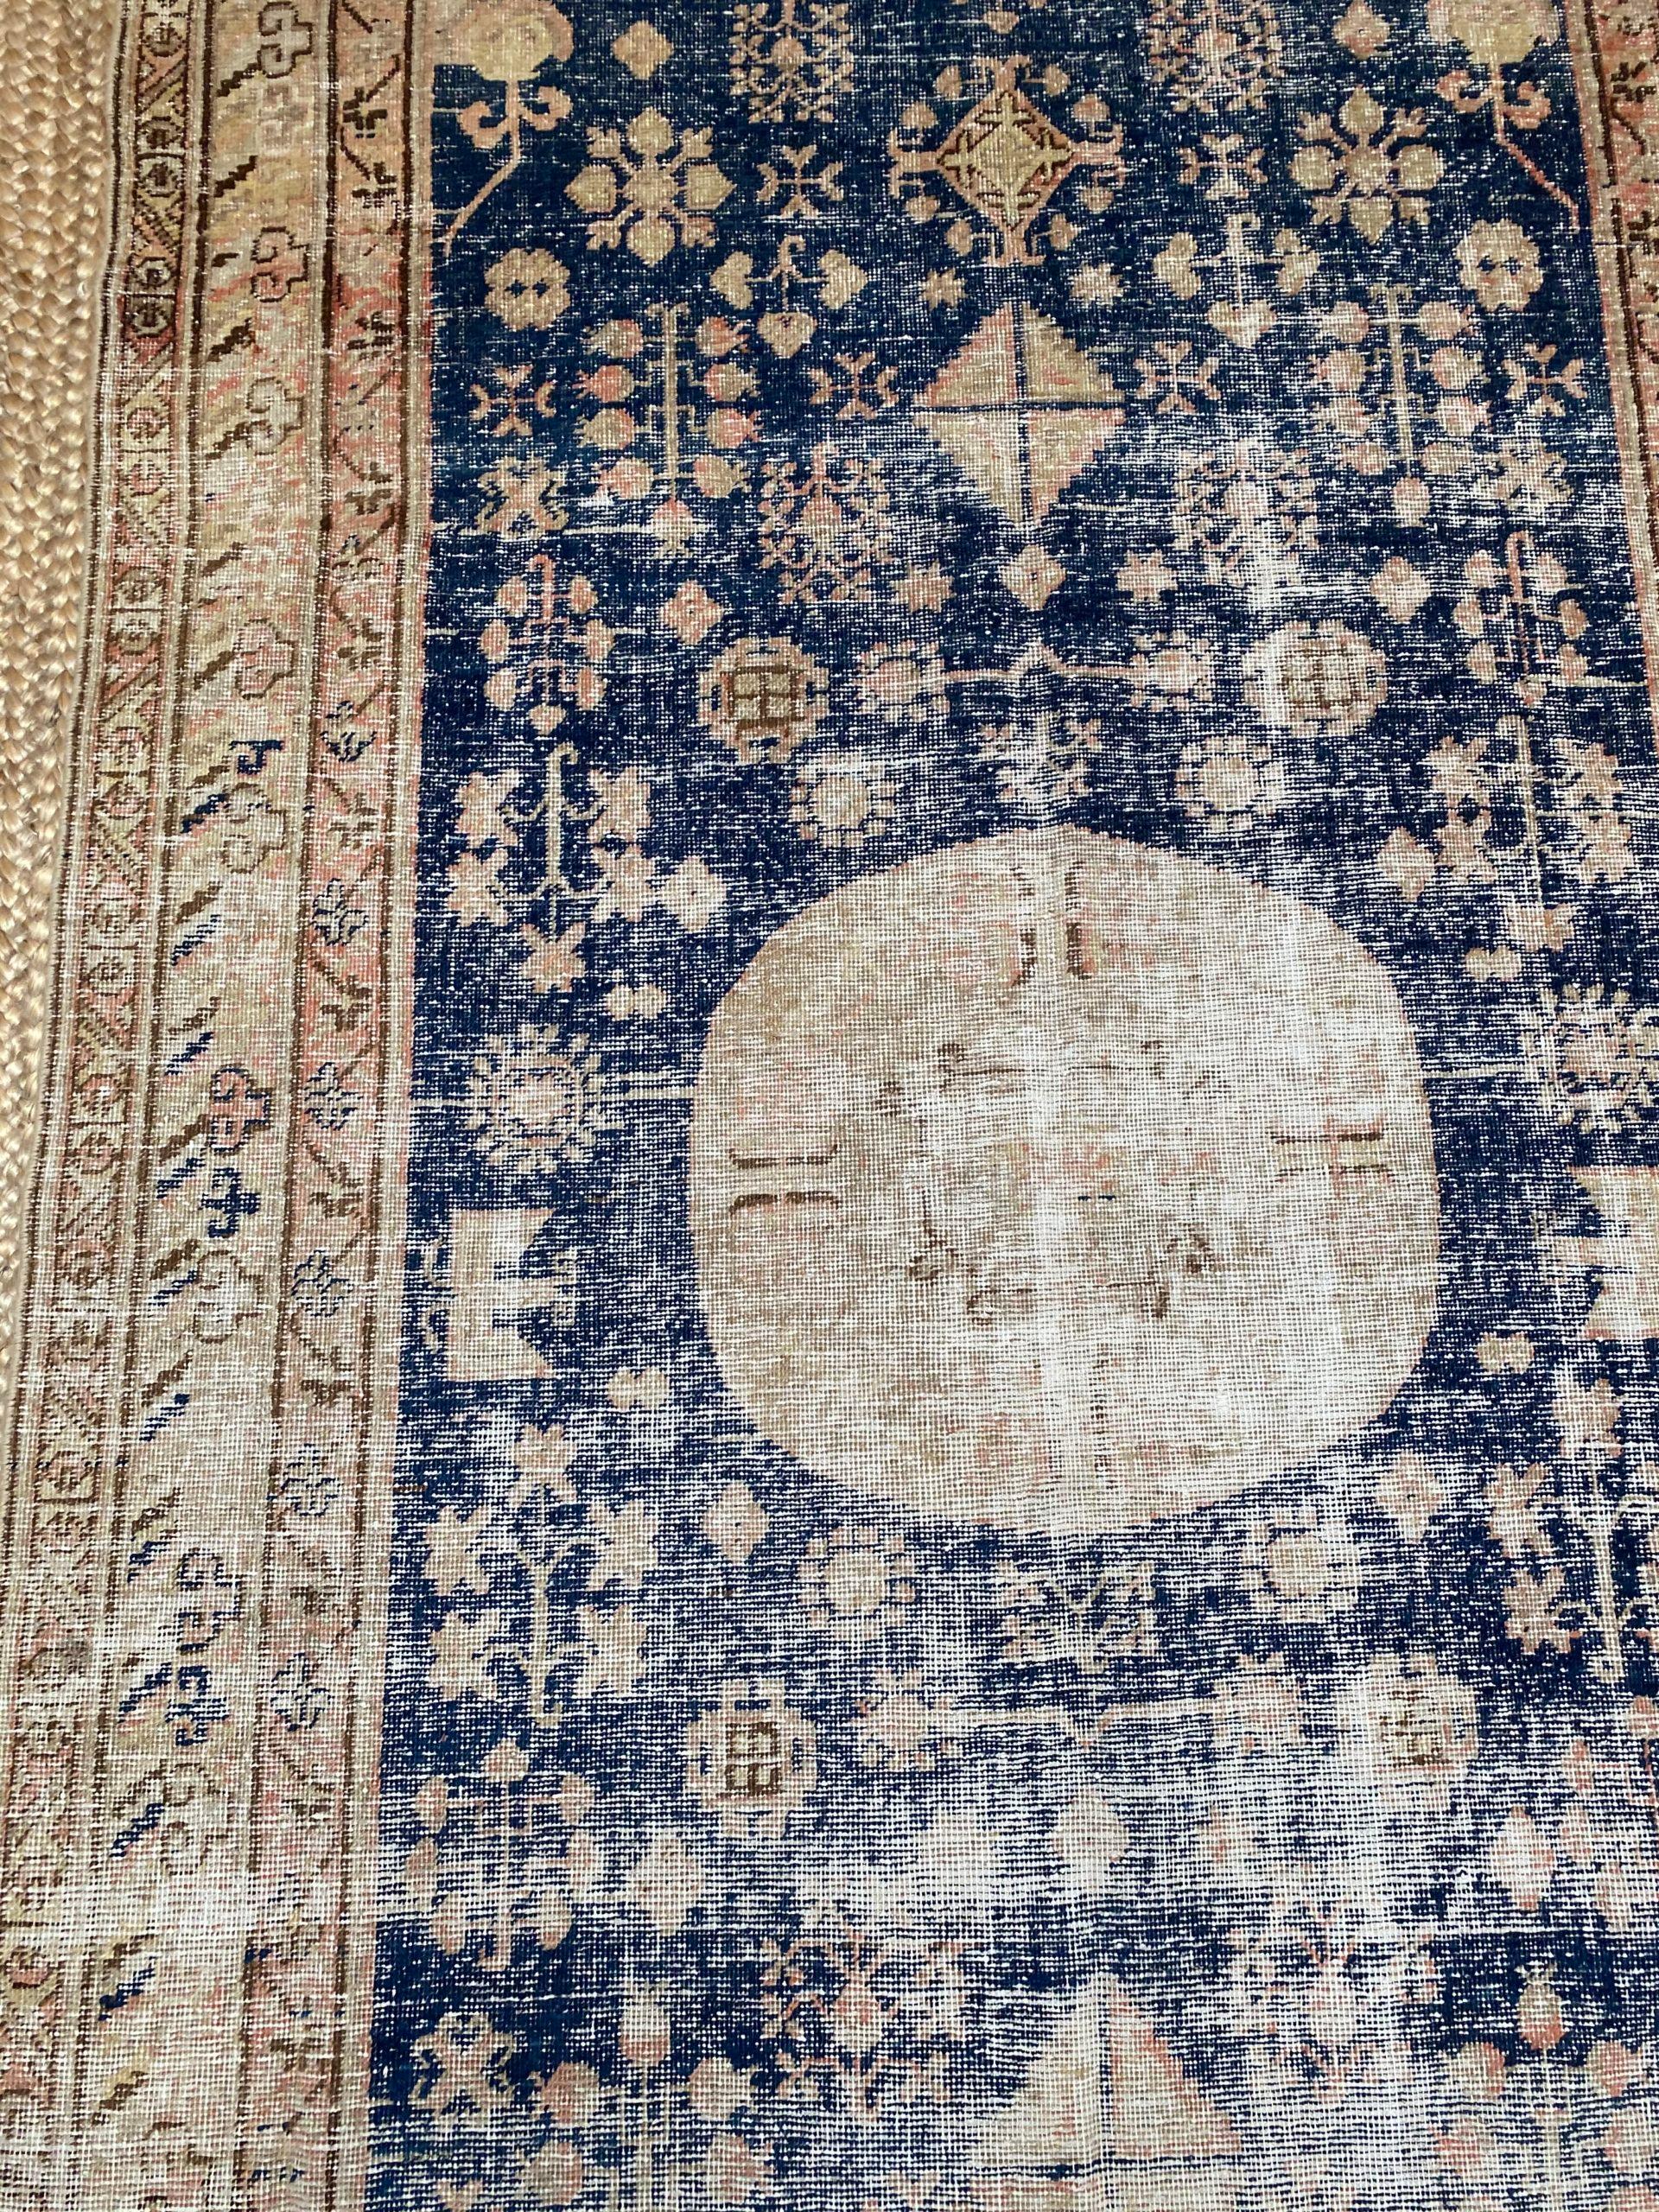 Orgin: Turkey
Dimensions: 11' x 5’8?
Age: 1920’s
Design: Khotan
Material: 100% Wool-pile
Color: Navy Blue, Beige, Brown

9371

An epitome of history, character and culture, Antique Khotan rugs add richness to a room. Produced in Khotan, an